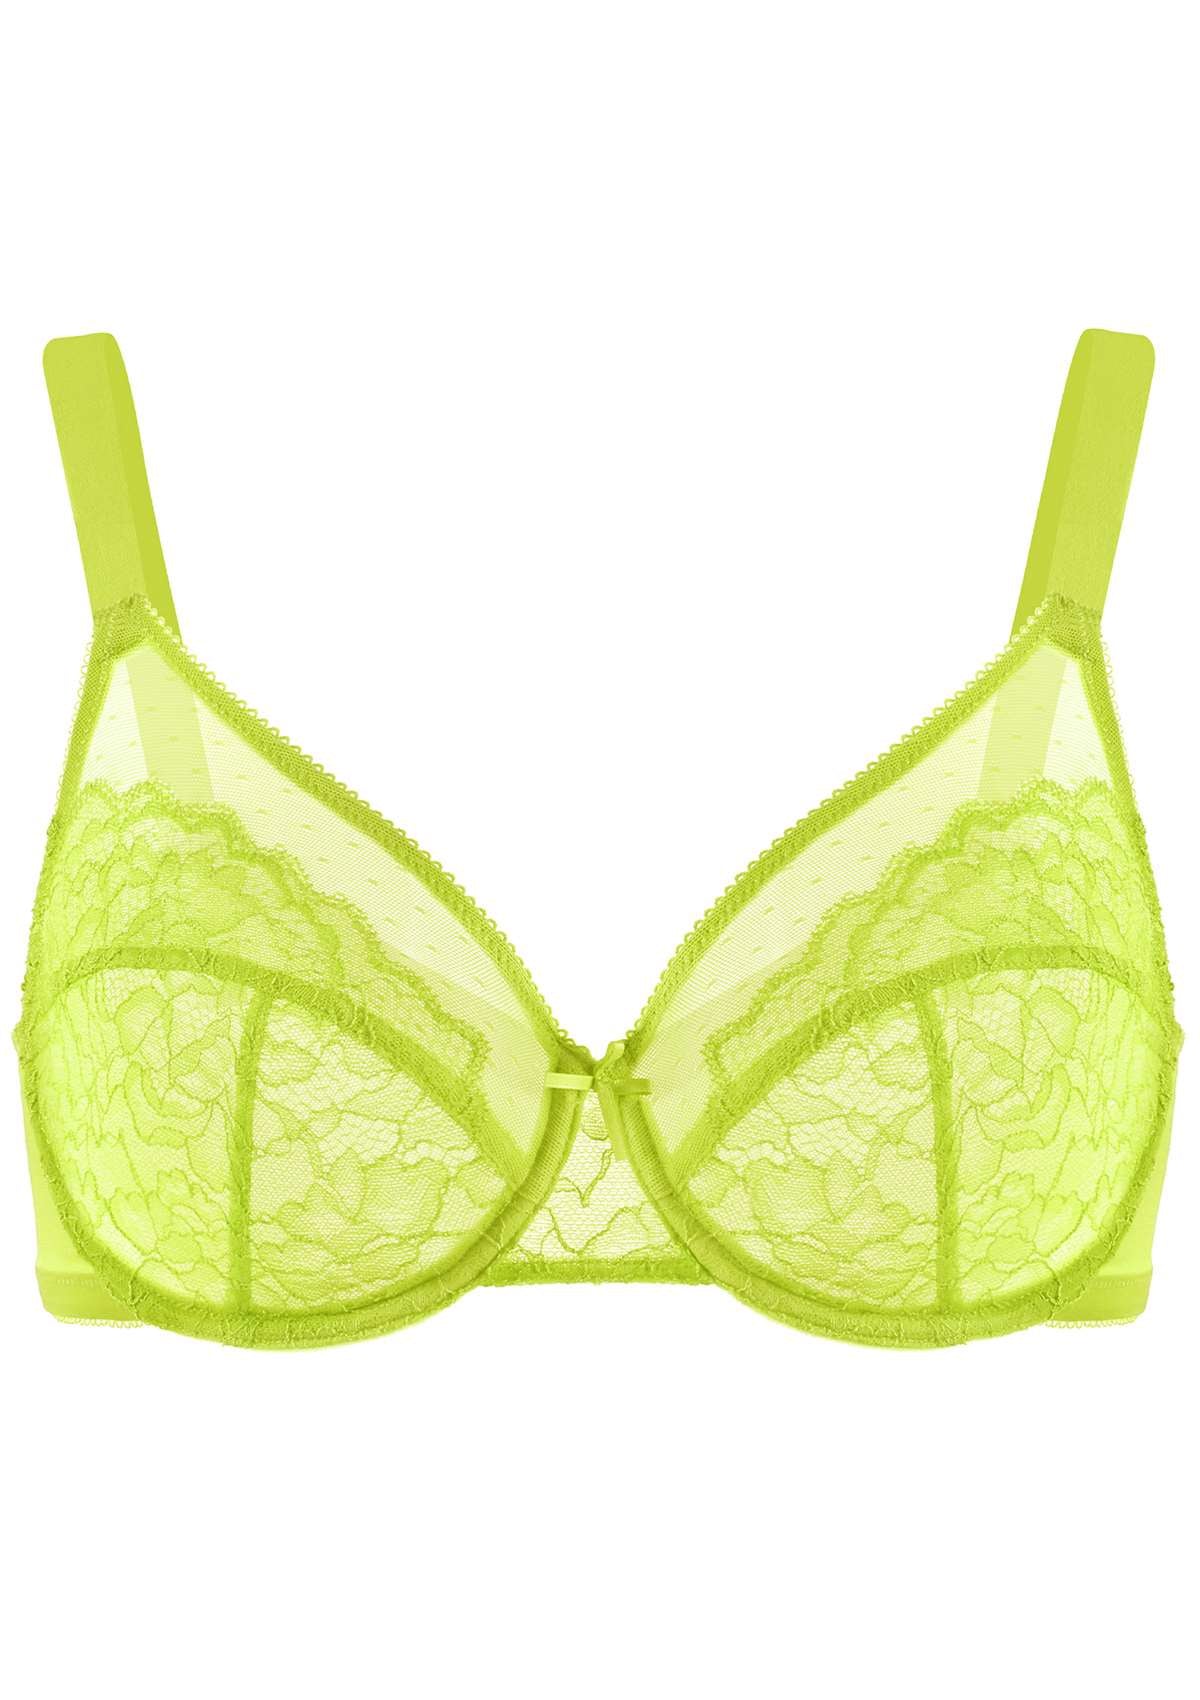 HSIA Enchante Full Cup Minimizing Bra: Supportive Unlined Lace Bra - Lime Green / 34 / DDD/F